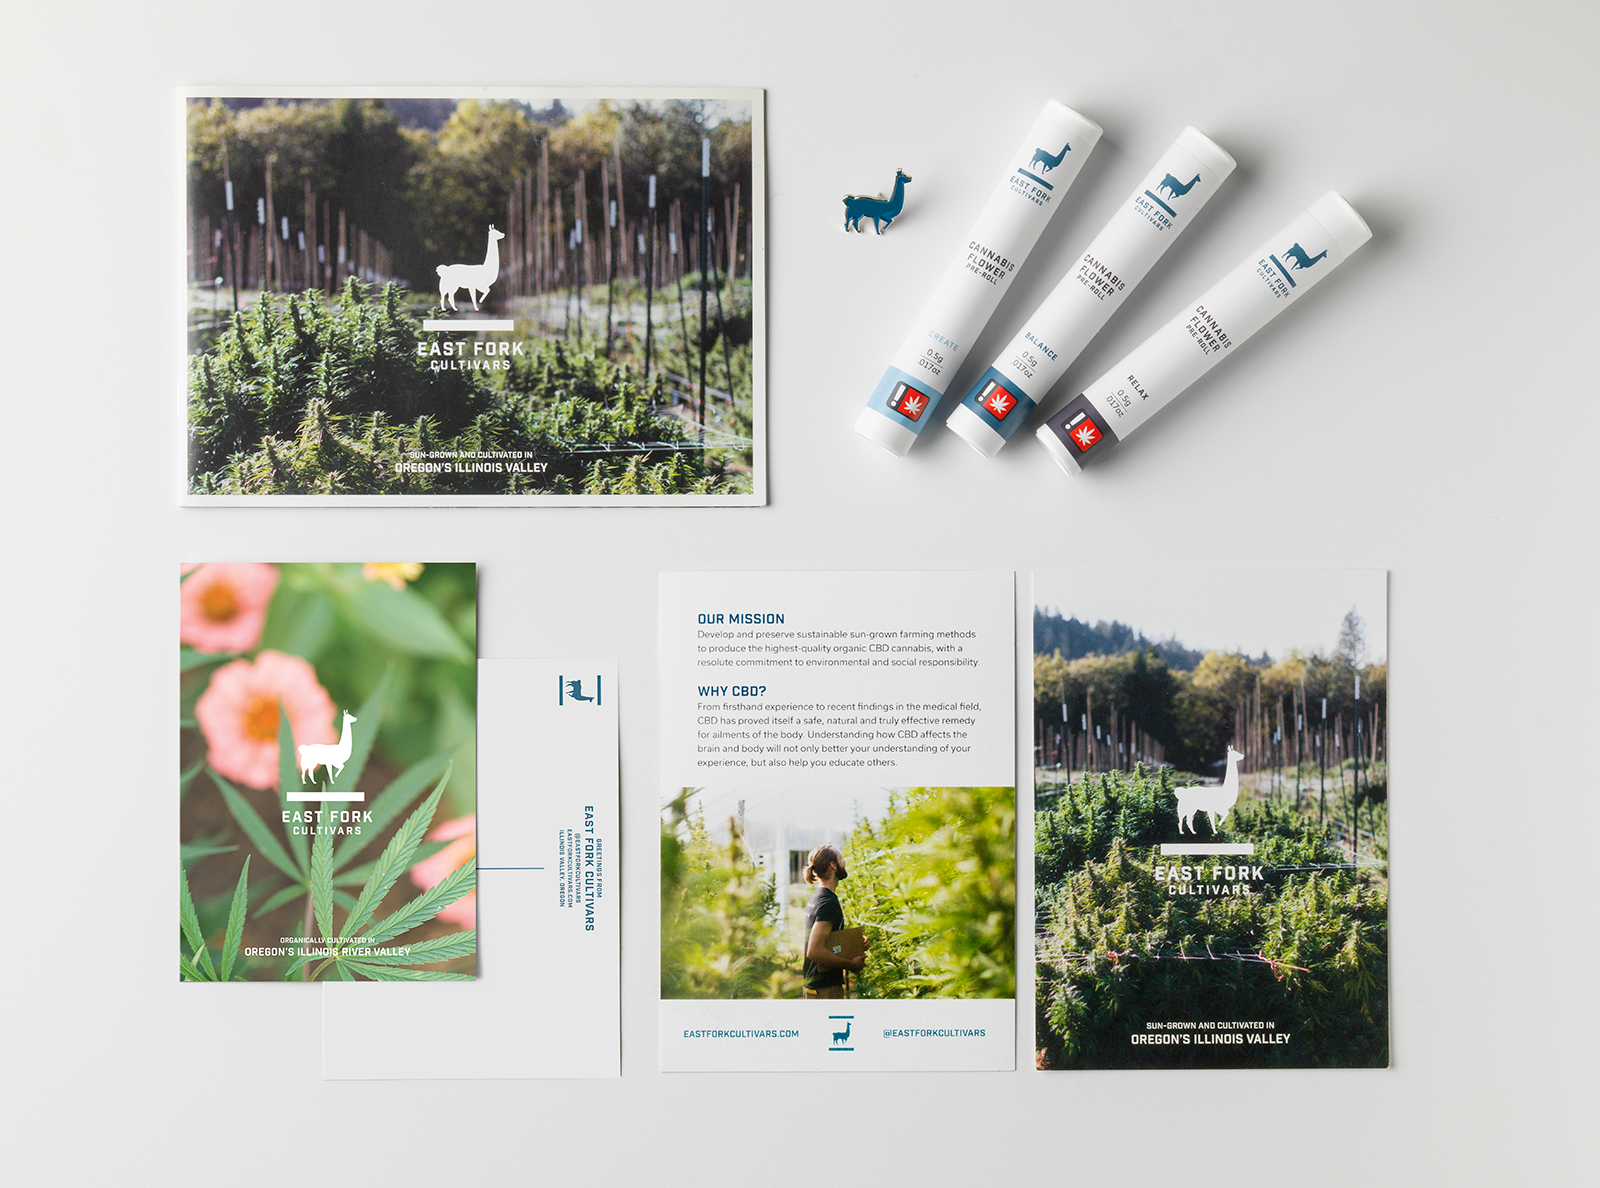 A collection of printed materials. A large card showing the plants on the farm with the white East Fork logo overtop; a blue enamel llama pin; three pre-rolls; the front and back of an informational card with a photo of the farm, stating Our Mission and Why CBD?; and the front and back of a postcard with a picture of cannabis leaves over pink flowers with the white East Fork logo overtop.